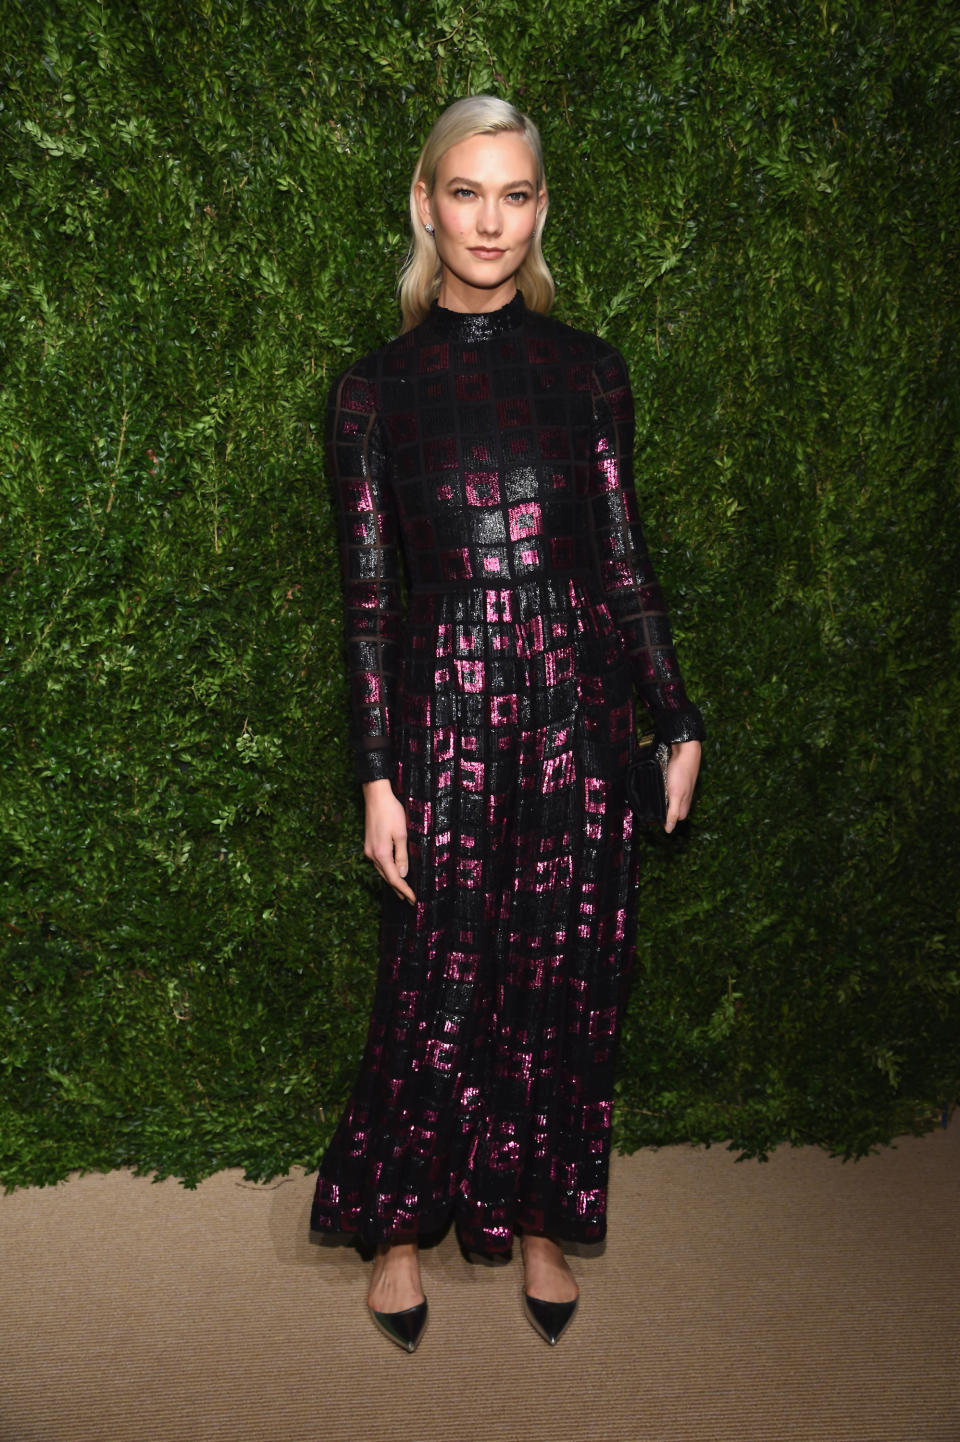 Karlie Kloss at the 14th Annual CFDA/Vogue Fashion Fund Awards dinner